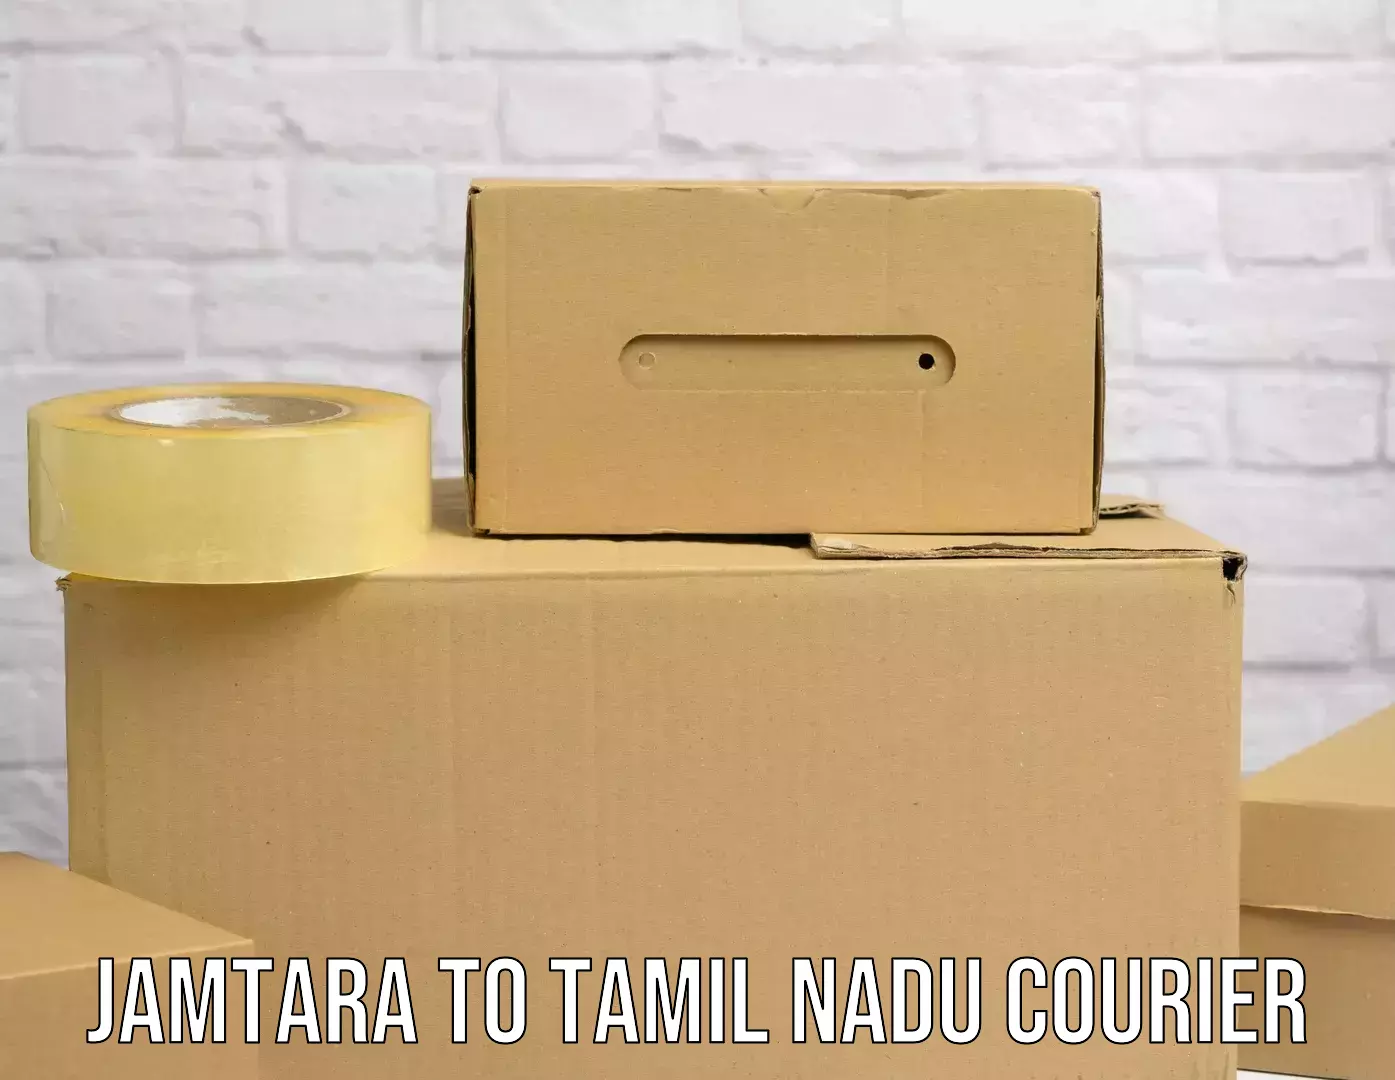 Package delivery network Jamtara to Mayiladuthurai